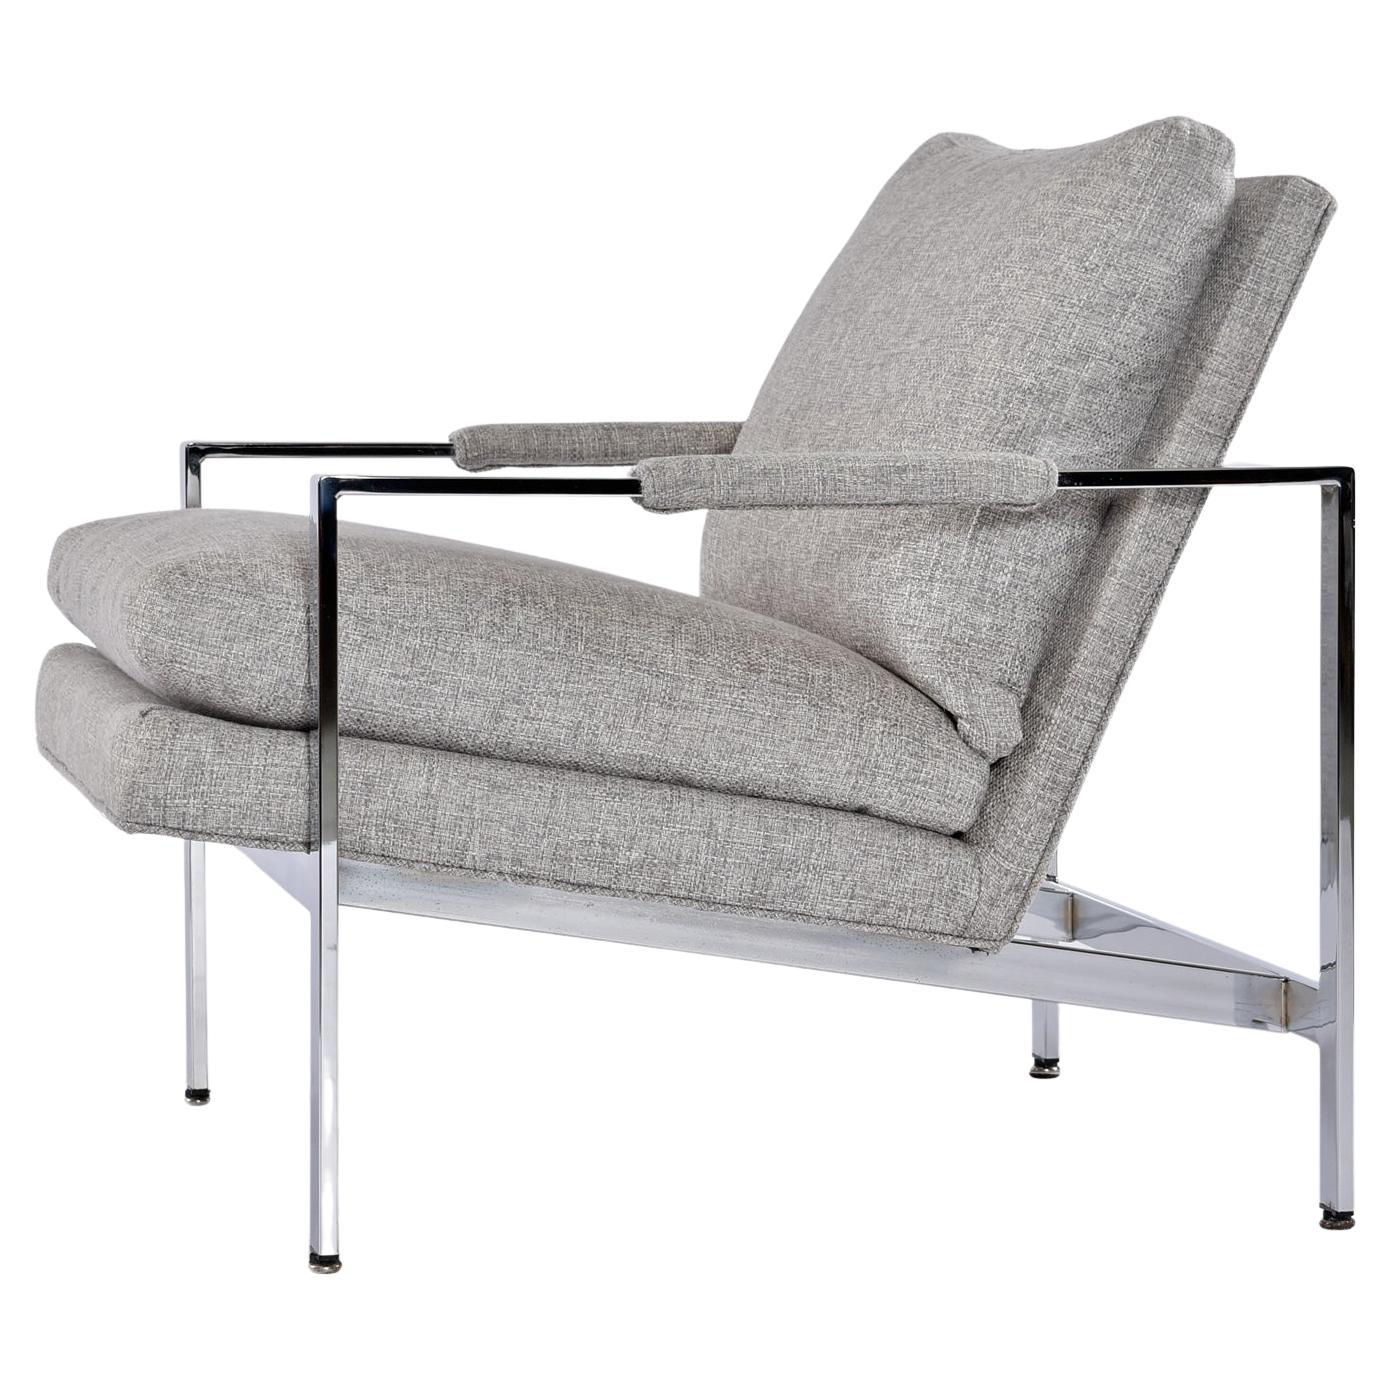 American Milo Baughman For Thayer Coggin 951 Flat Bar Chrome Lounge Chairs in Grey Tweed For Sale